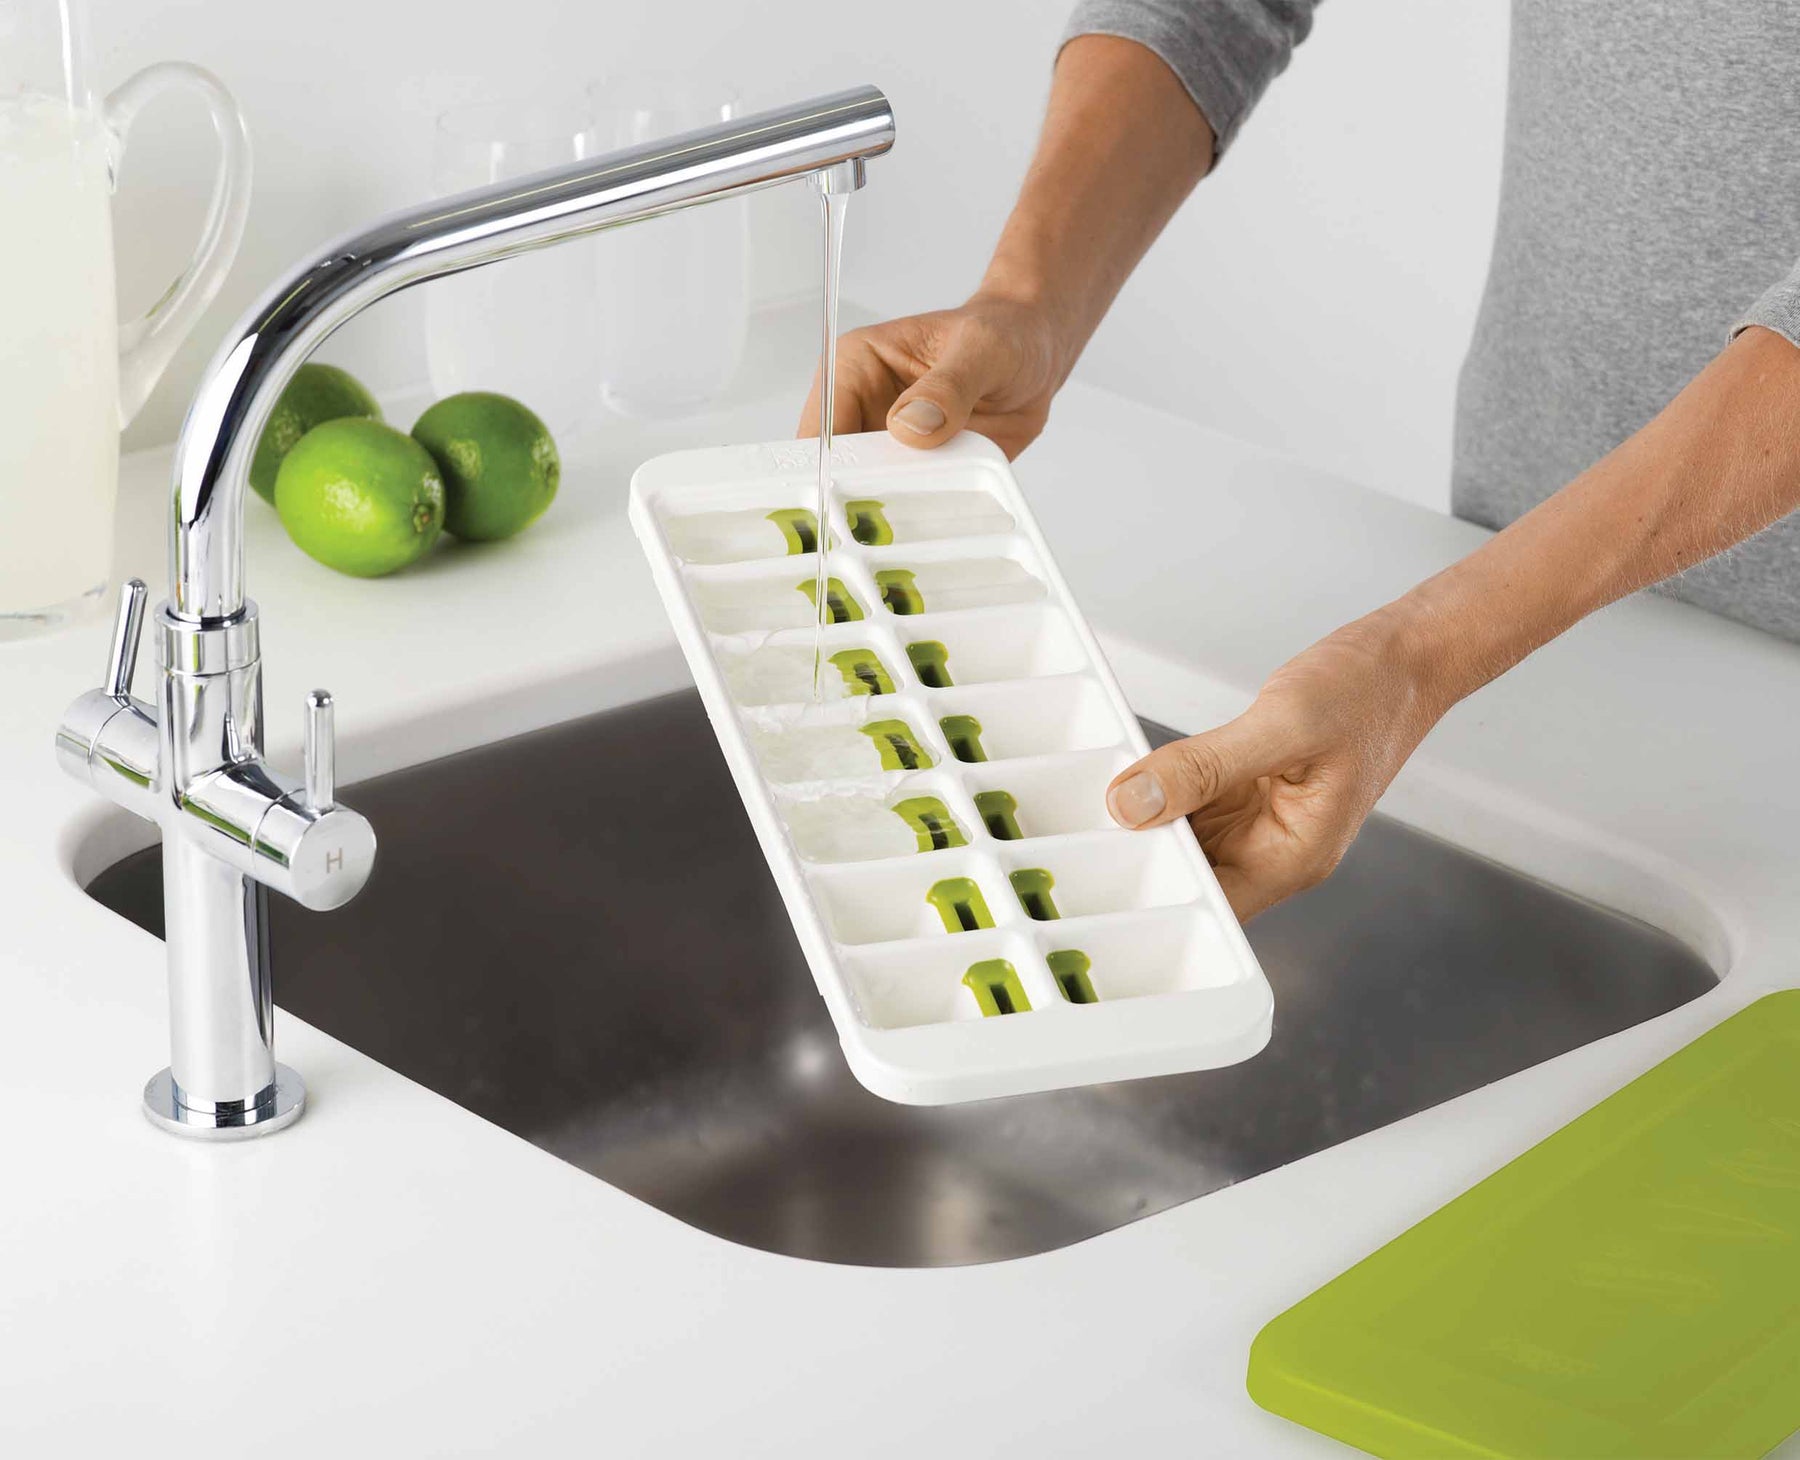 QuickSnap™ Plus Ice Cube Tray - Green